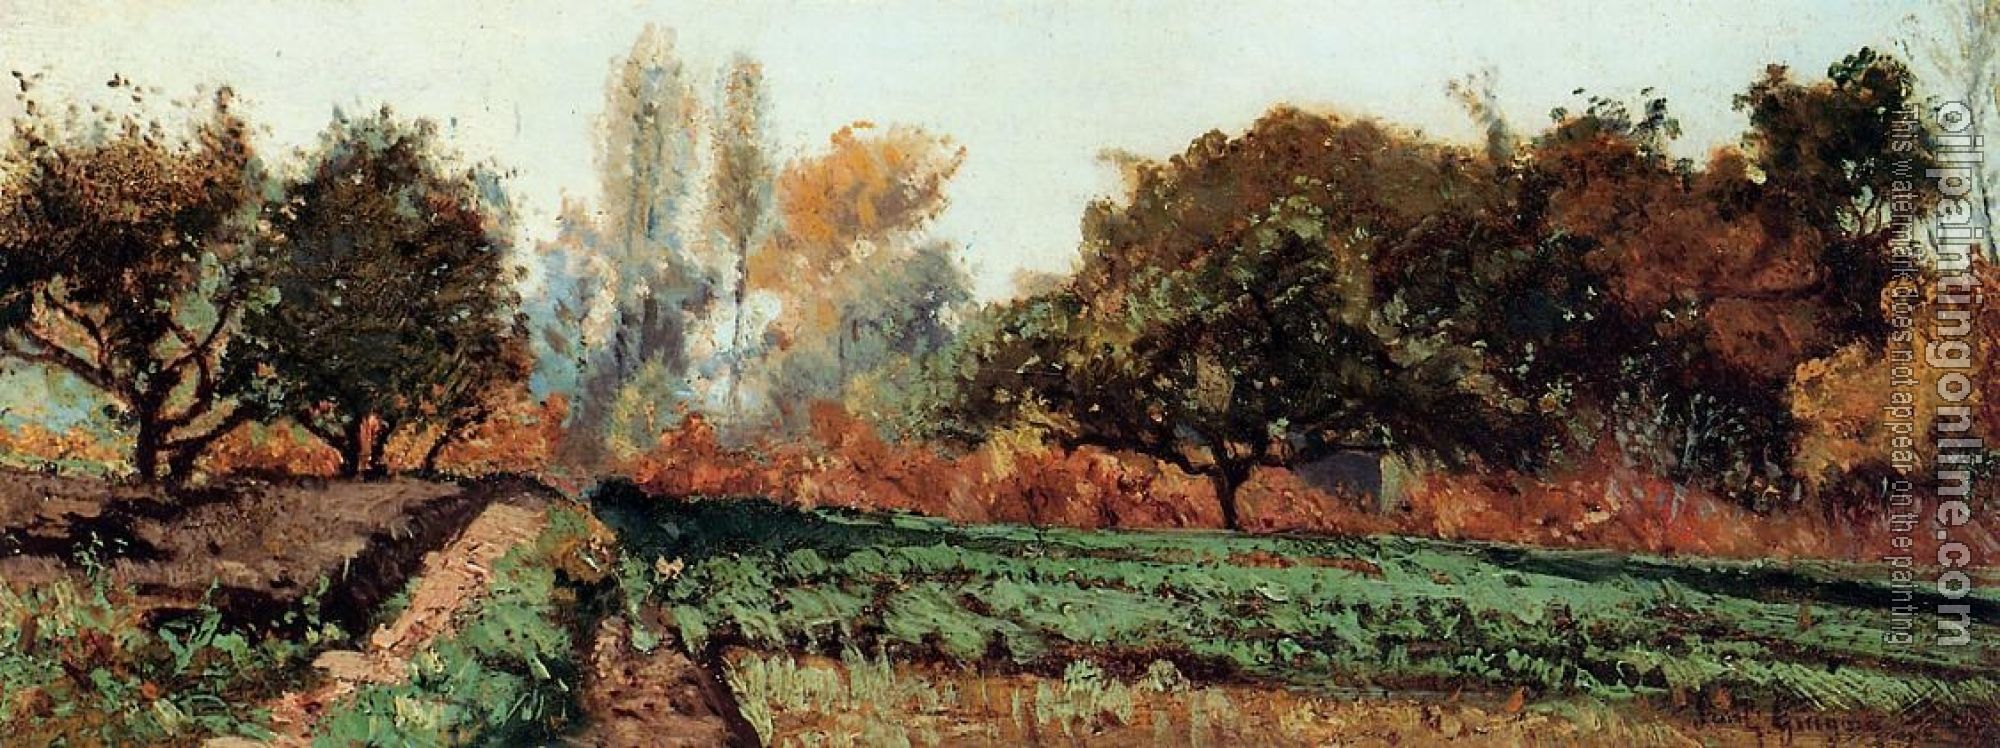 Guigou, Paul-Camille - Fields and Trees, Autumn Study